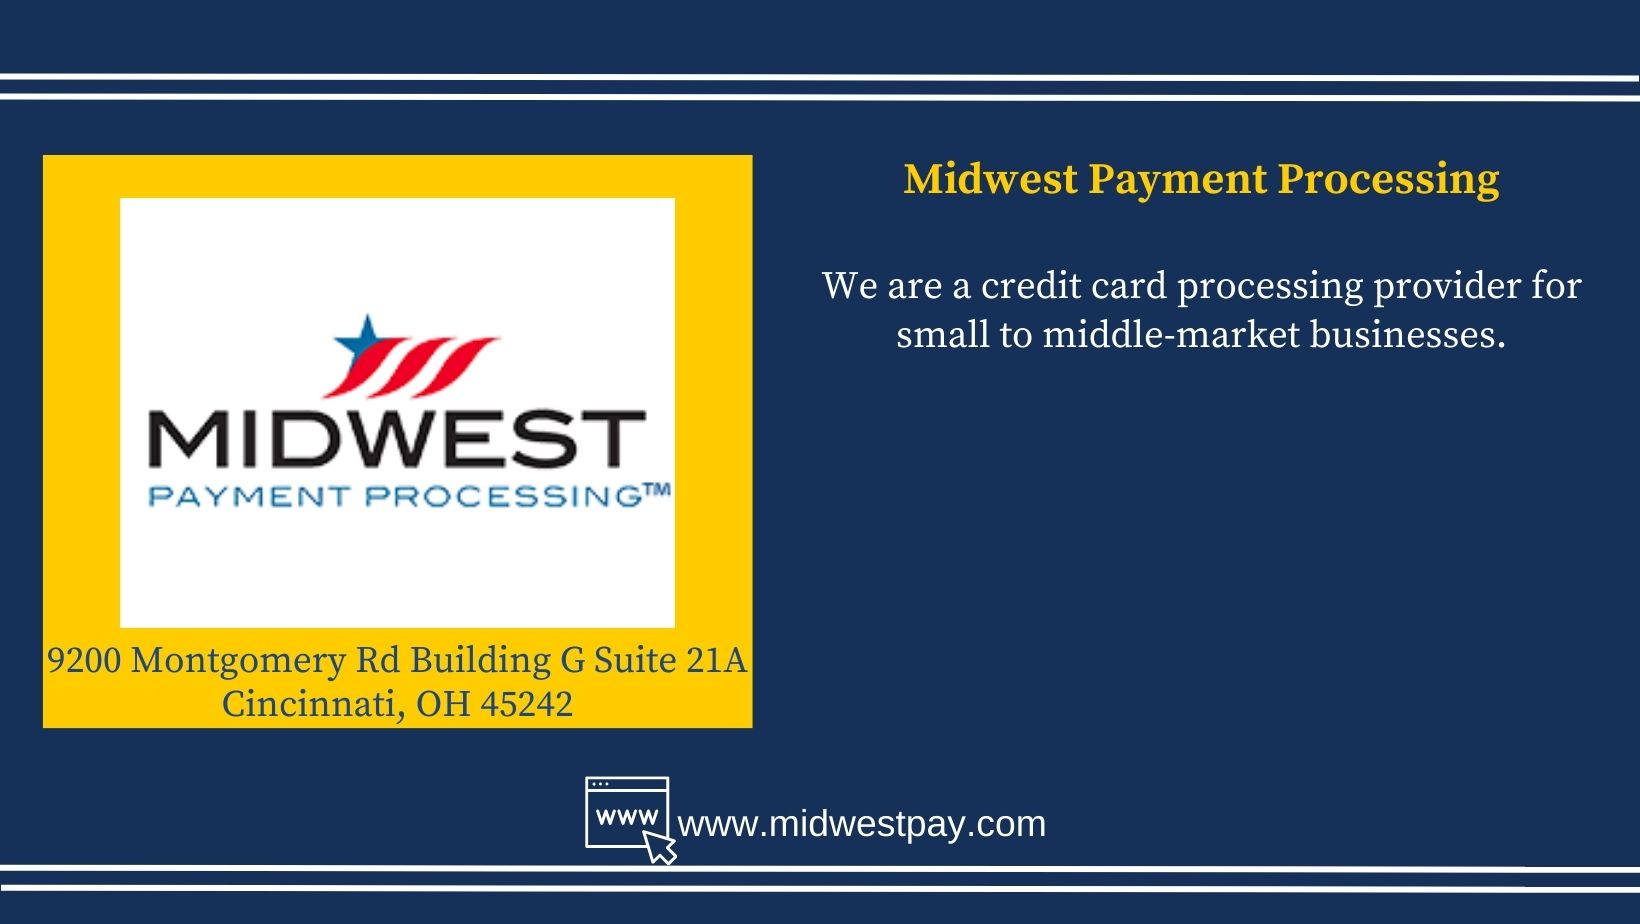 Midwest-Payment-Processing.jpg